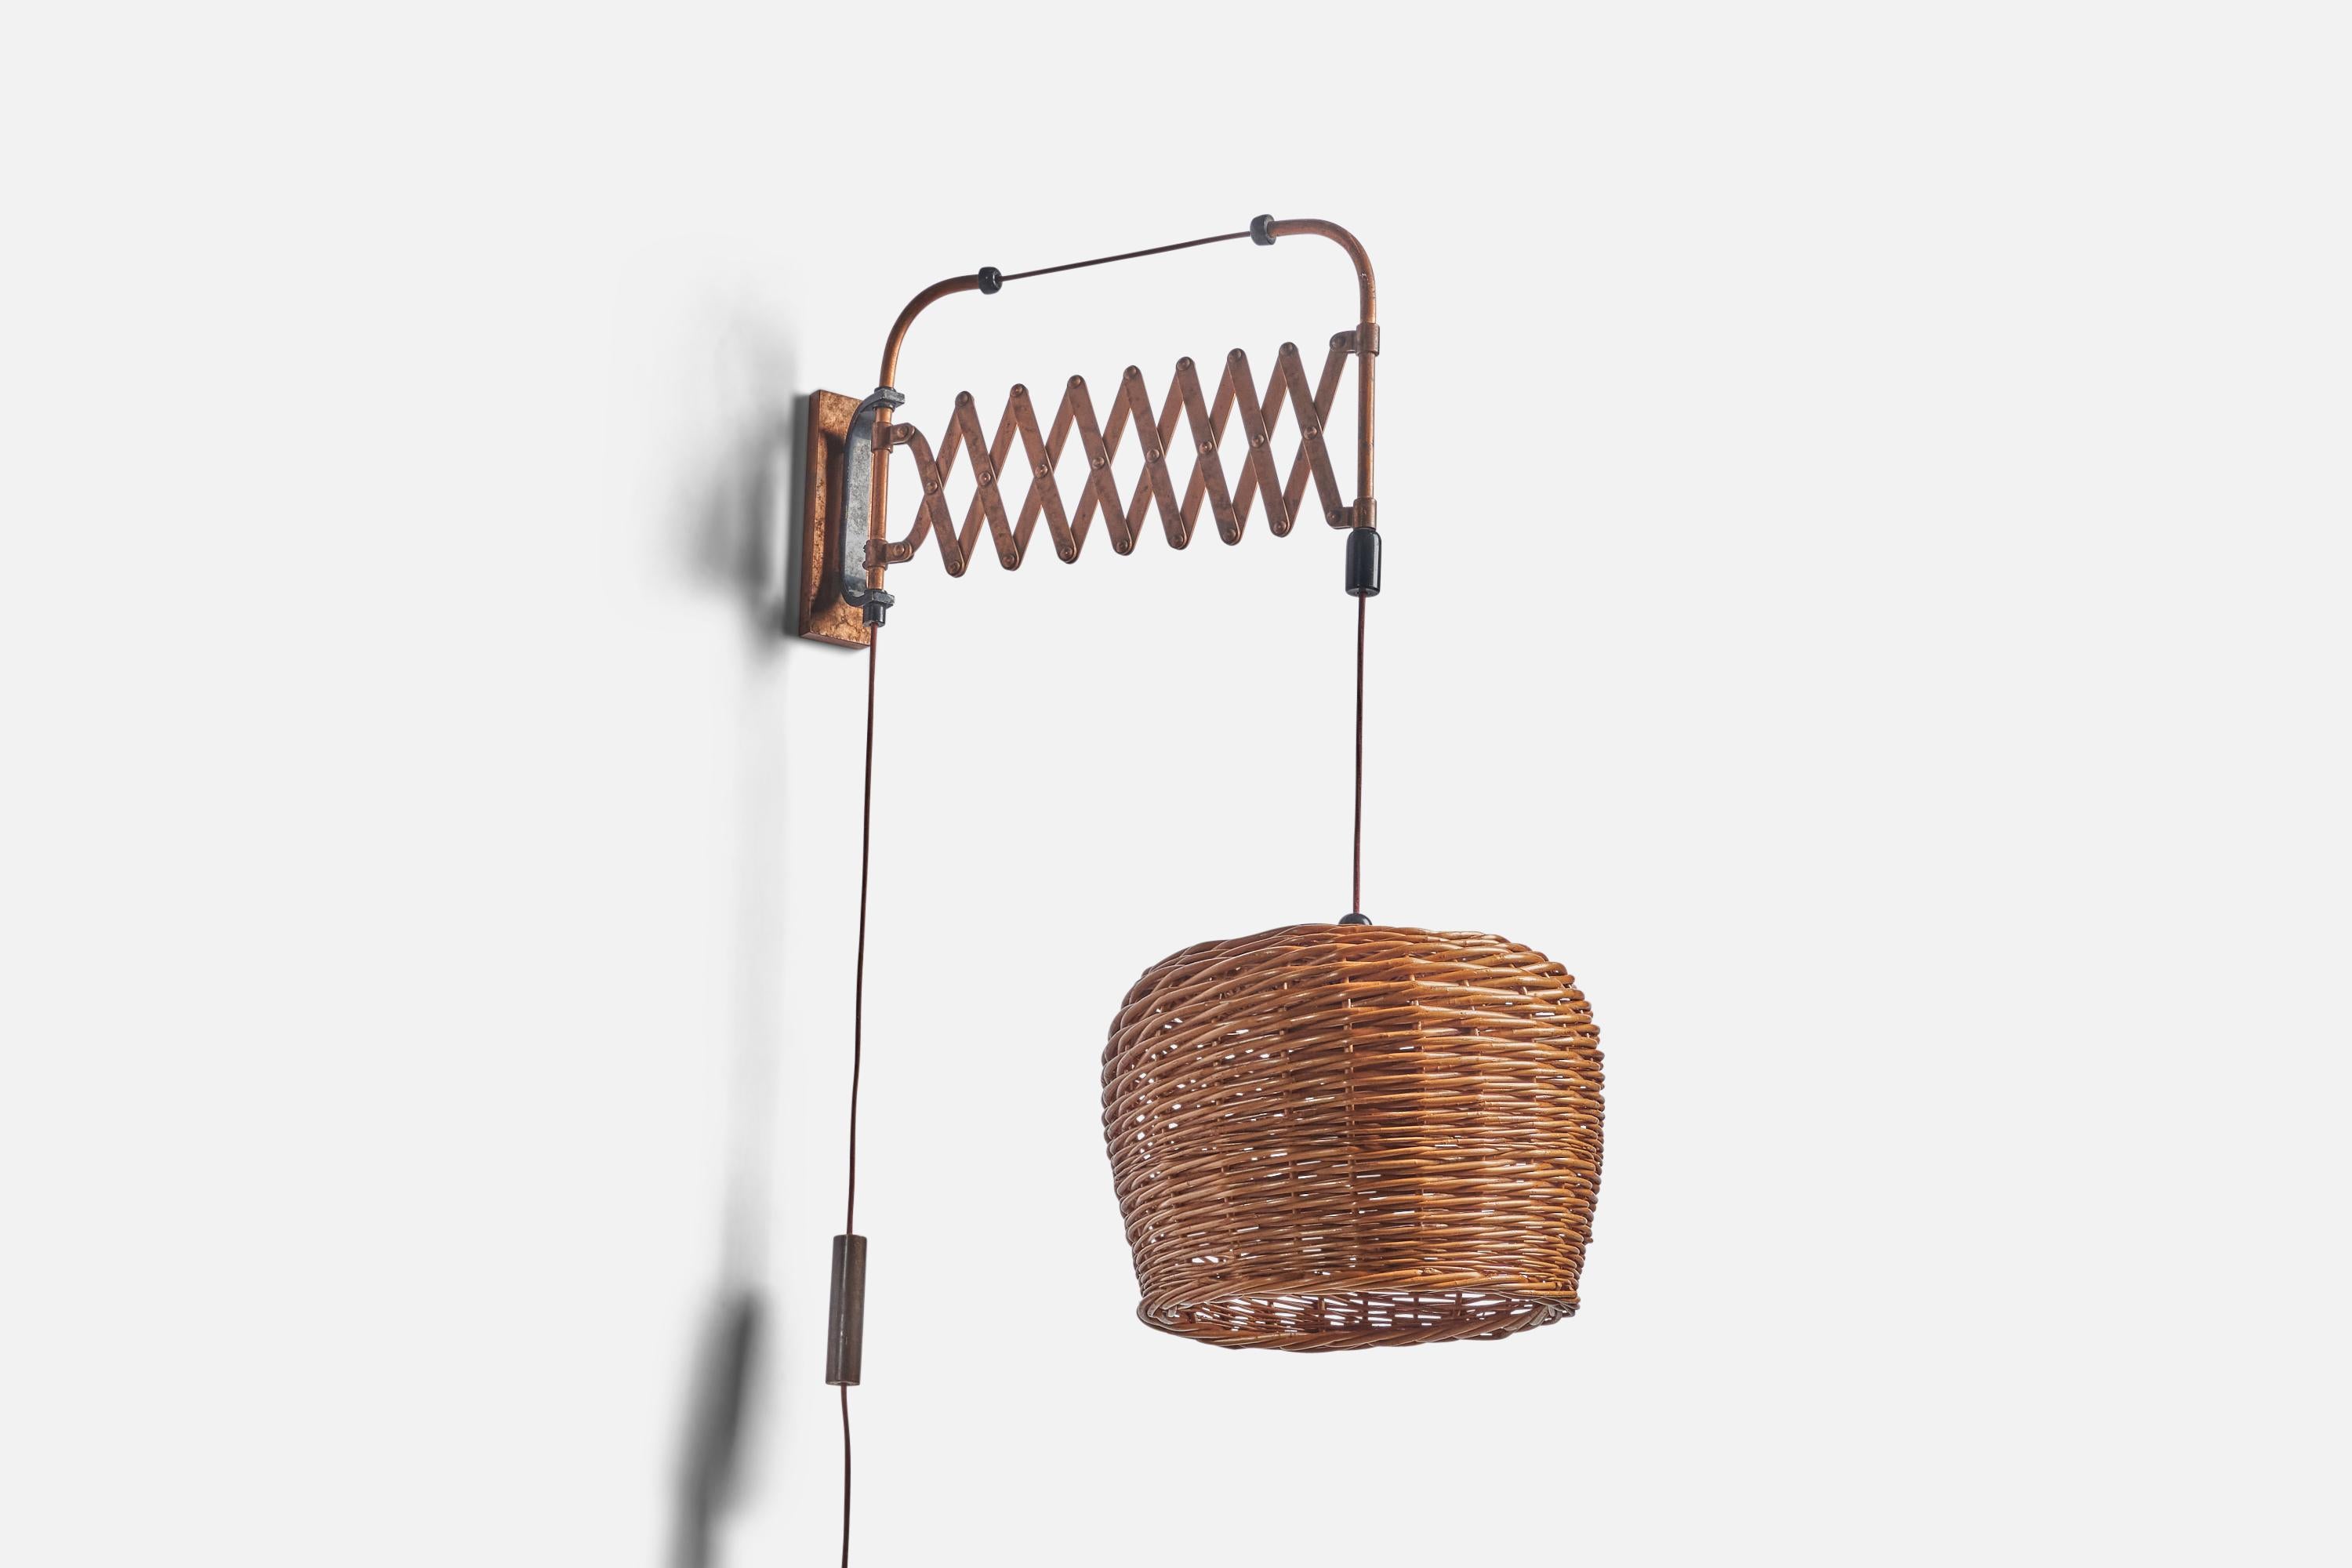 
An adjustable copper and rattan wall light designed and produced in Italy, c. 1940s.
Overall Dimensions (inches): 11.05” H x 11.45” W x 6.35” D
Back Plate Dimensions (inches): 7.5” H, 2”:W, 0.5” D
Bulb Specifications: E-26 Bulb
Number of Sockets: